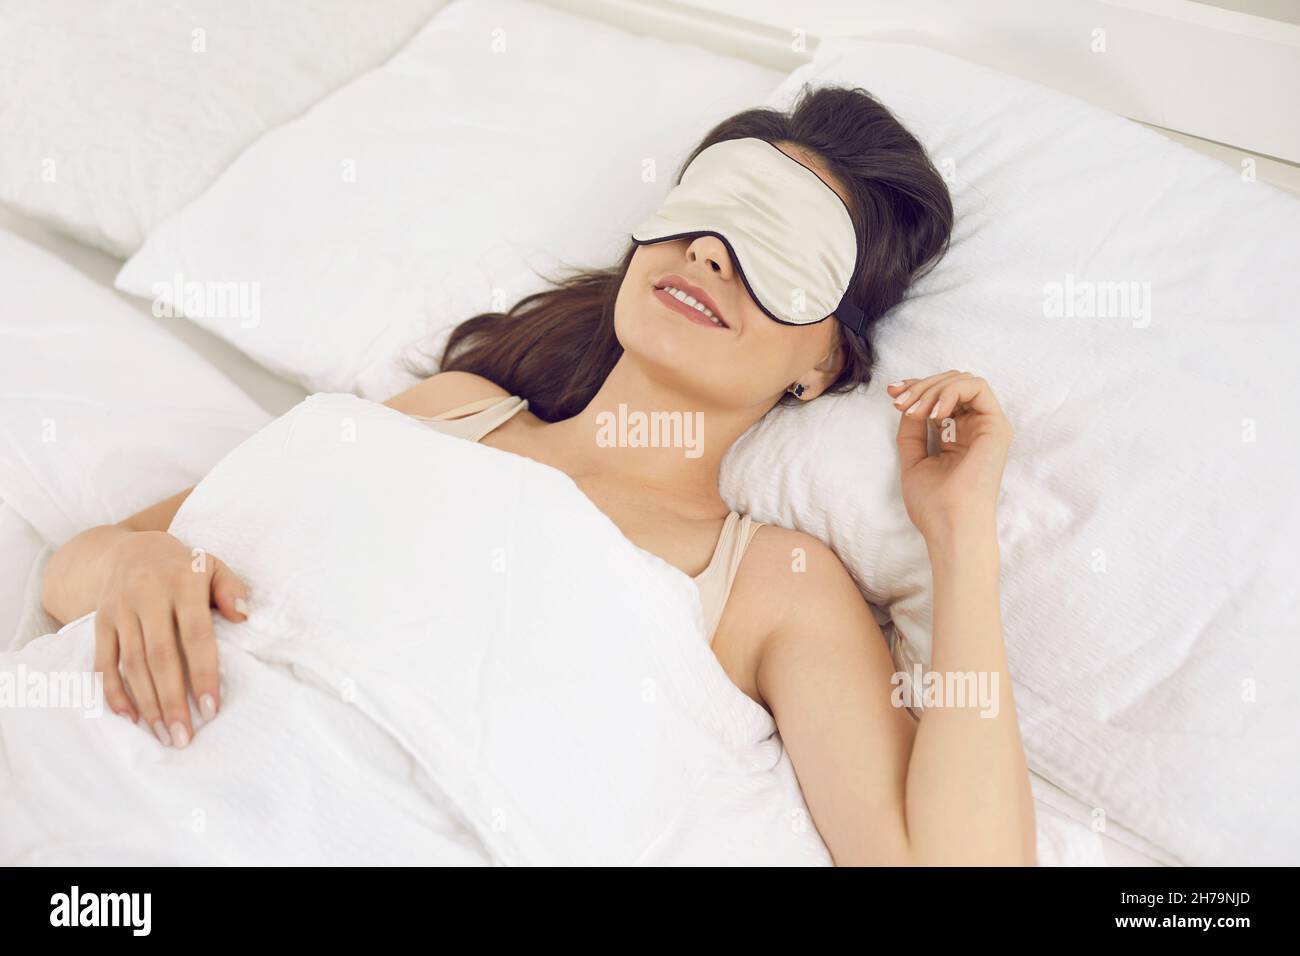 Happy relaxed beautiful young woman wearing an eye mask while sleeping in her bed Stock Photo